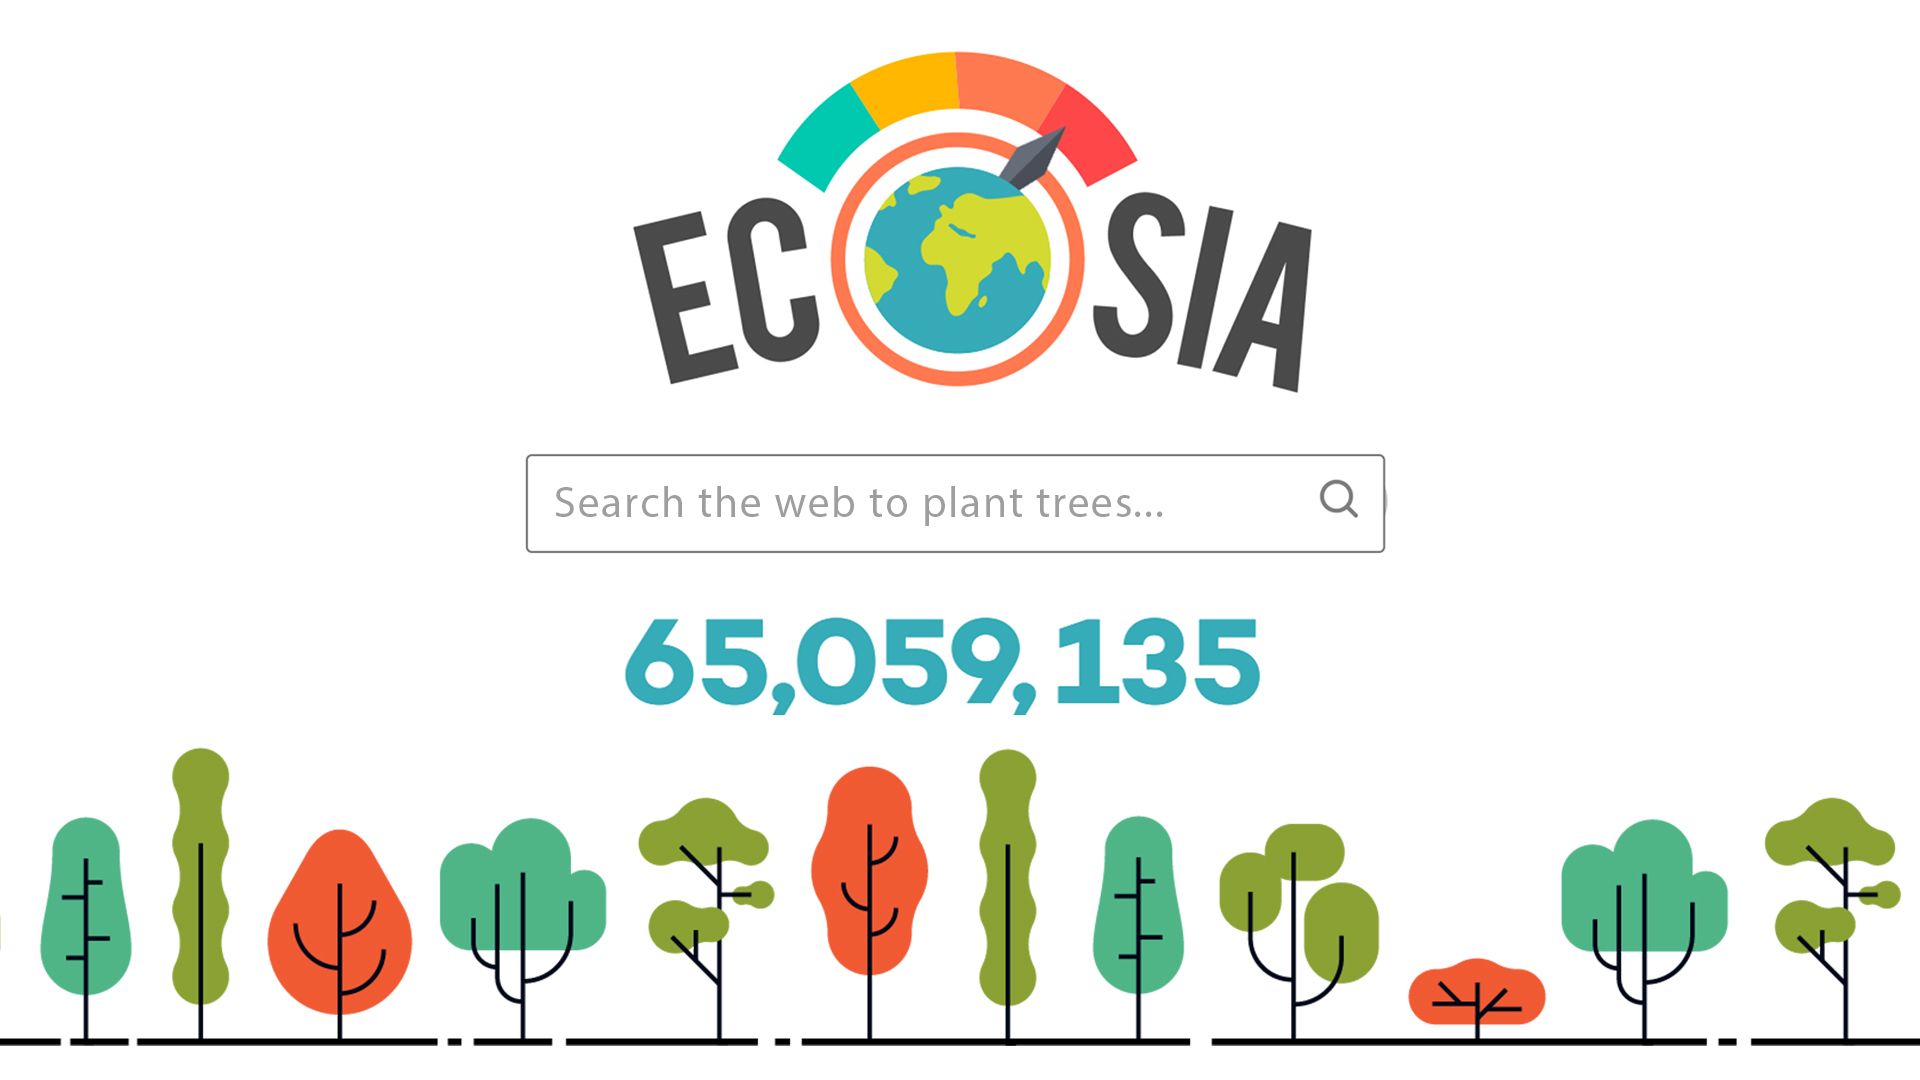 Green search engine Ecosia launches its own browser